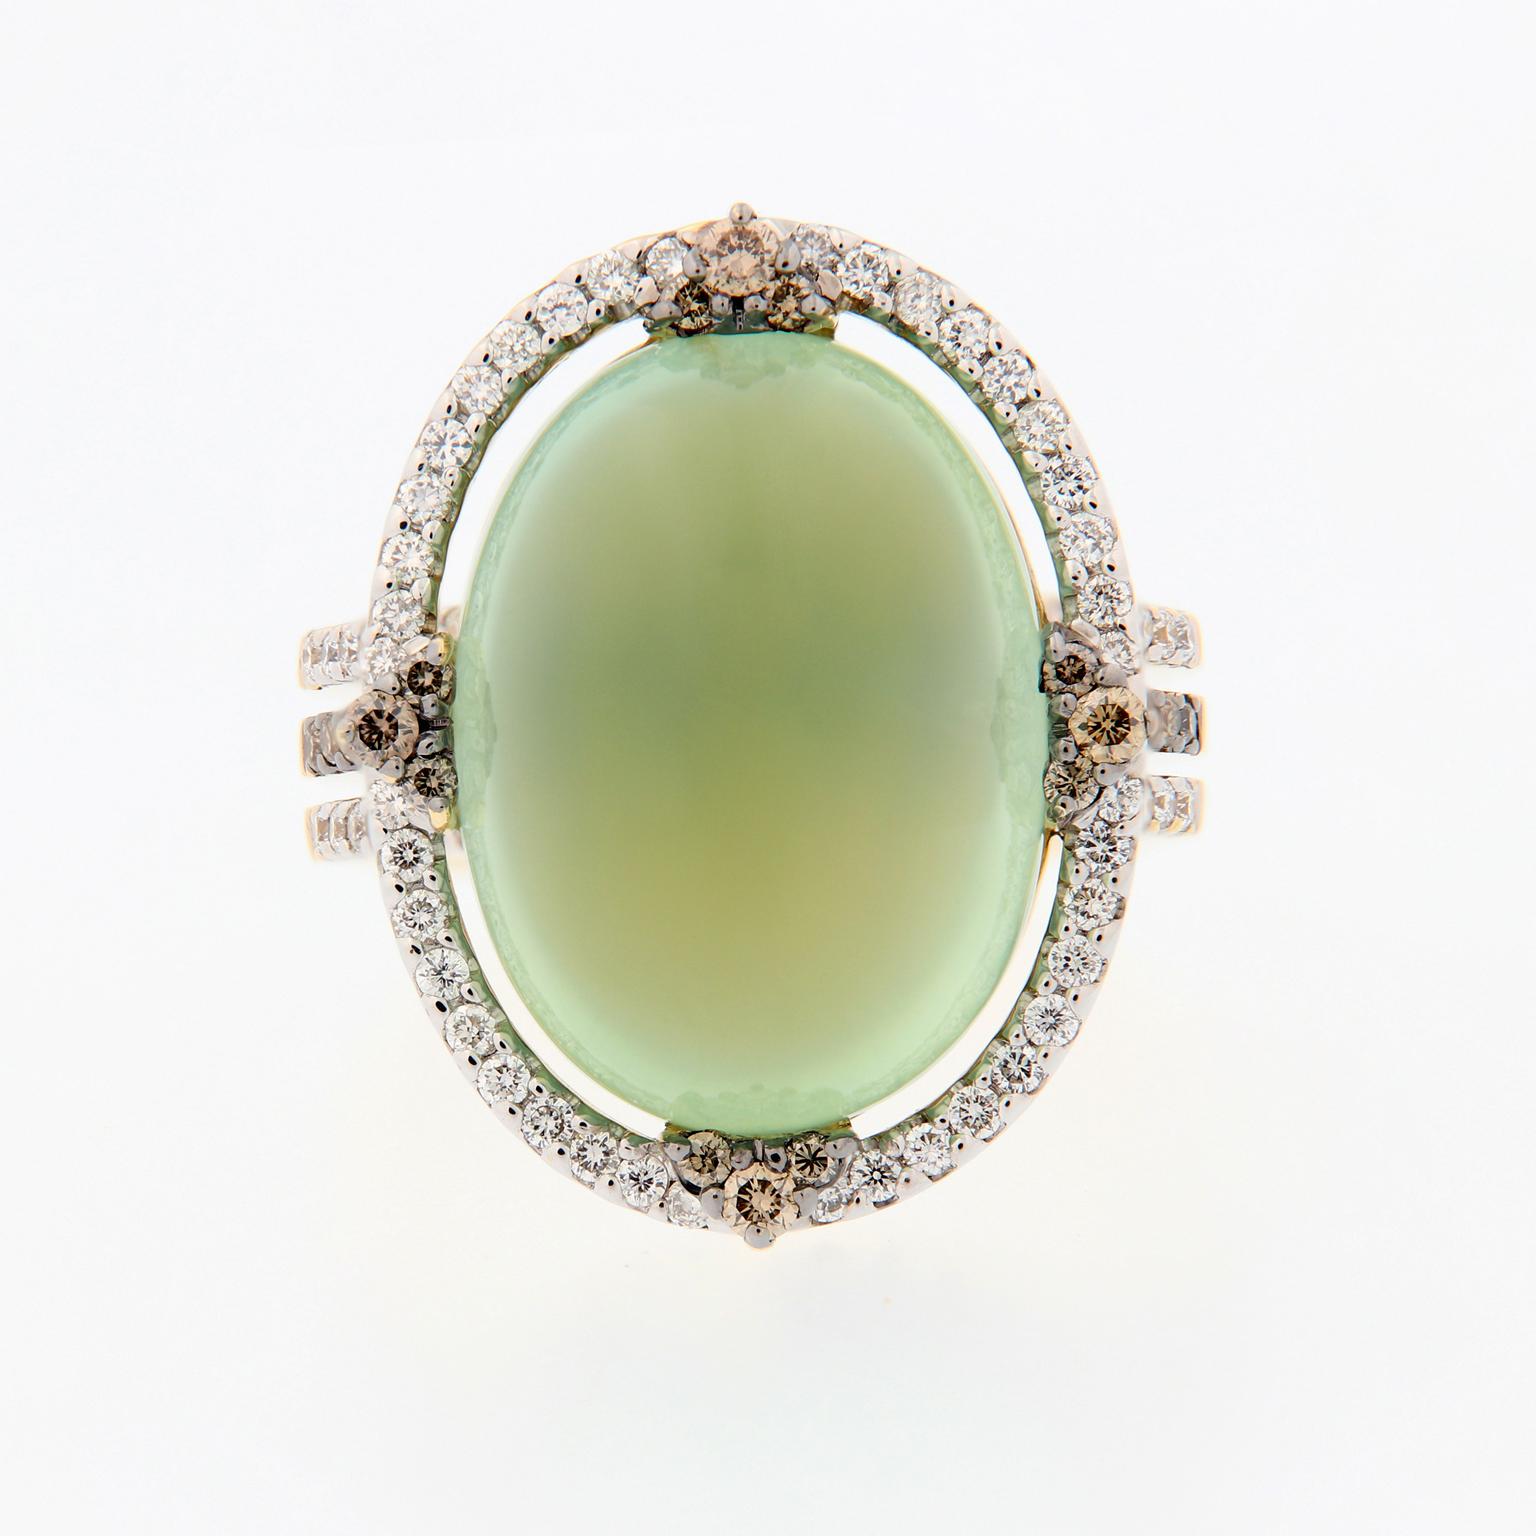 Prehnite is an intriguing gemstone that features a unique green glow. This ring centers around a 16.92 carat cabochon cut prehnite, accented with white and champagne colored diamonds. Ring size 6.5. Weighs 12.5 grams.

Prehnite 16.92 ct
Diamonds